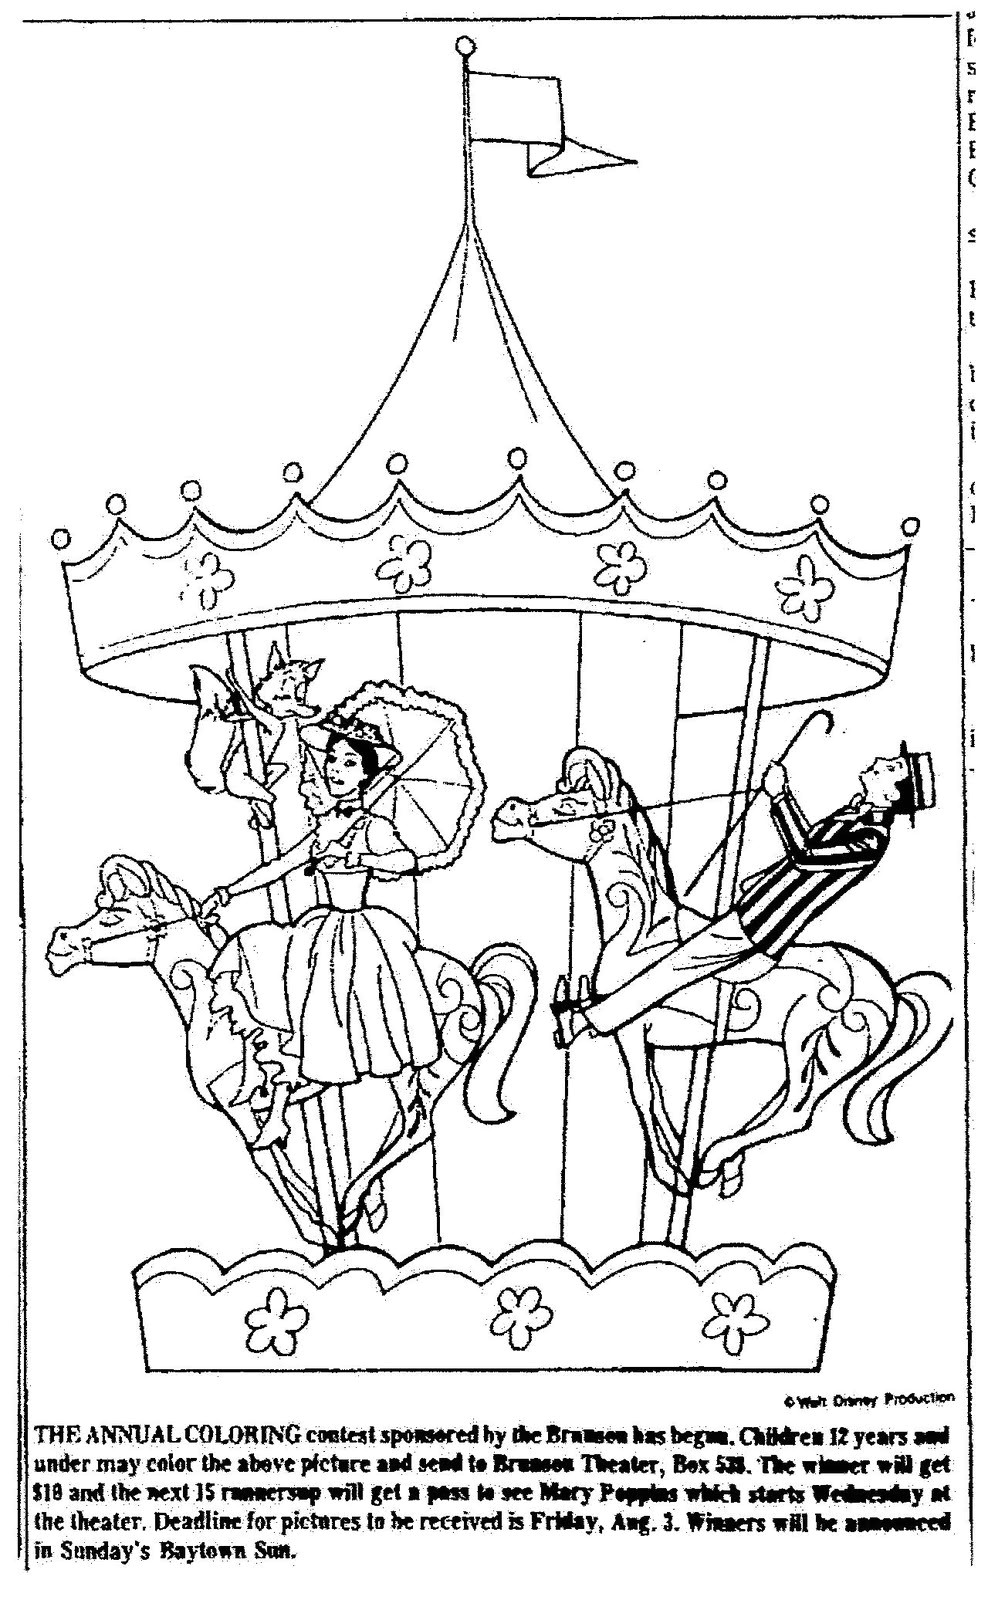 Lovely Design Ideas Mary Poppins Coloring Pages Free High Quality For Seguridadip Co